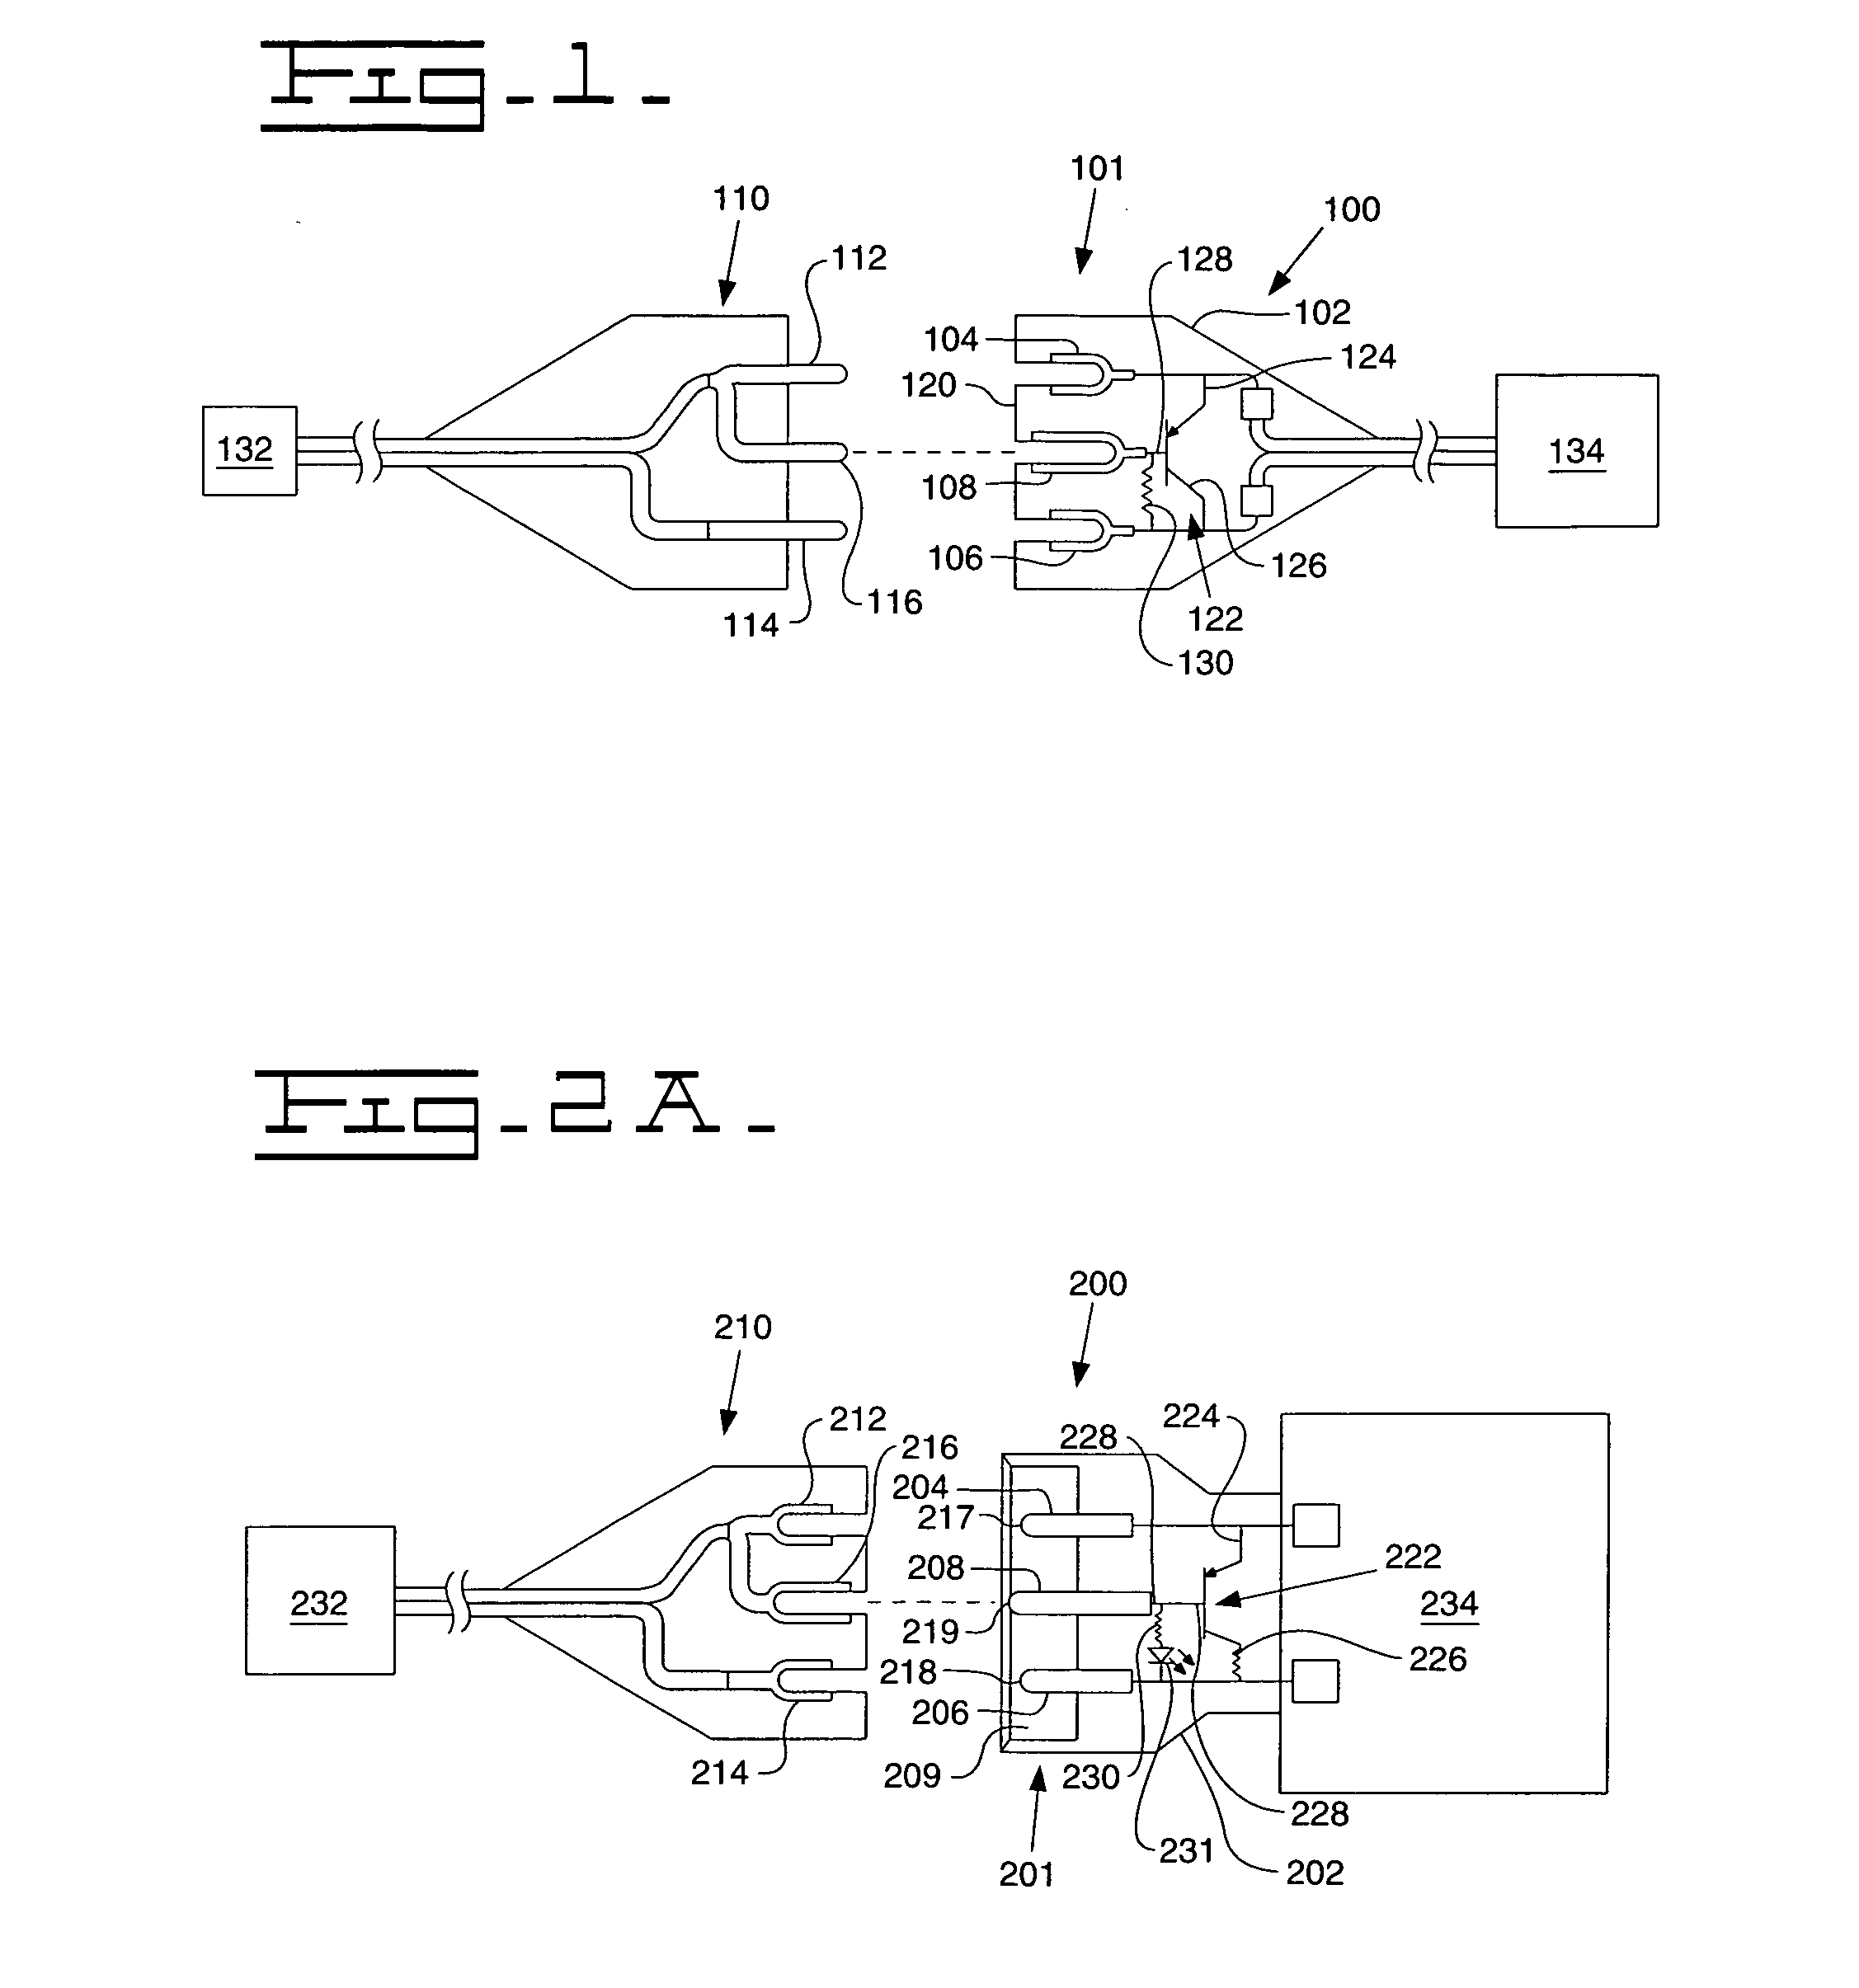 Electrical shorting system